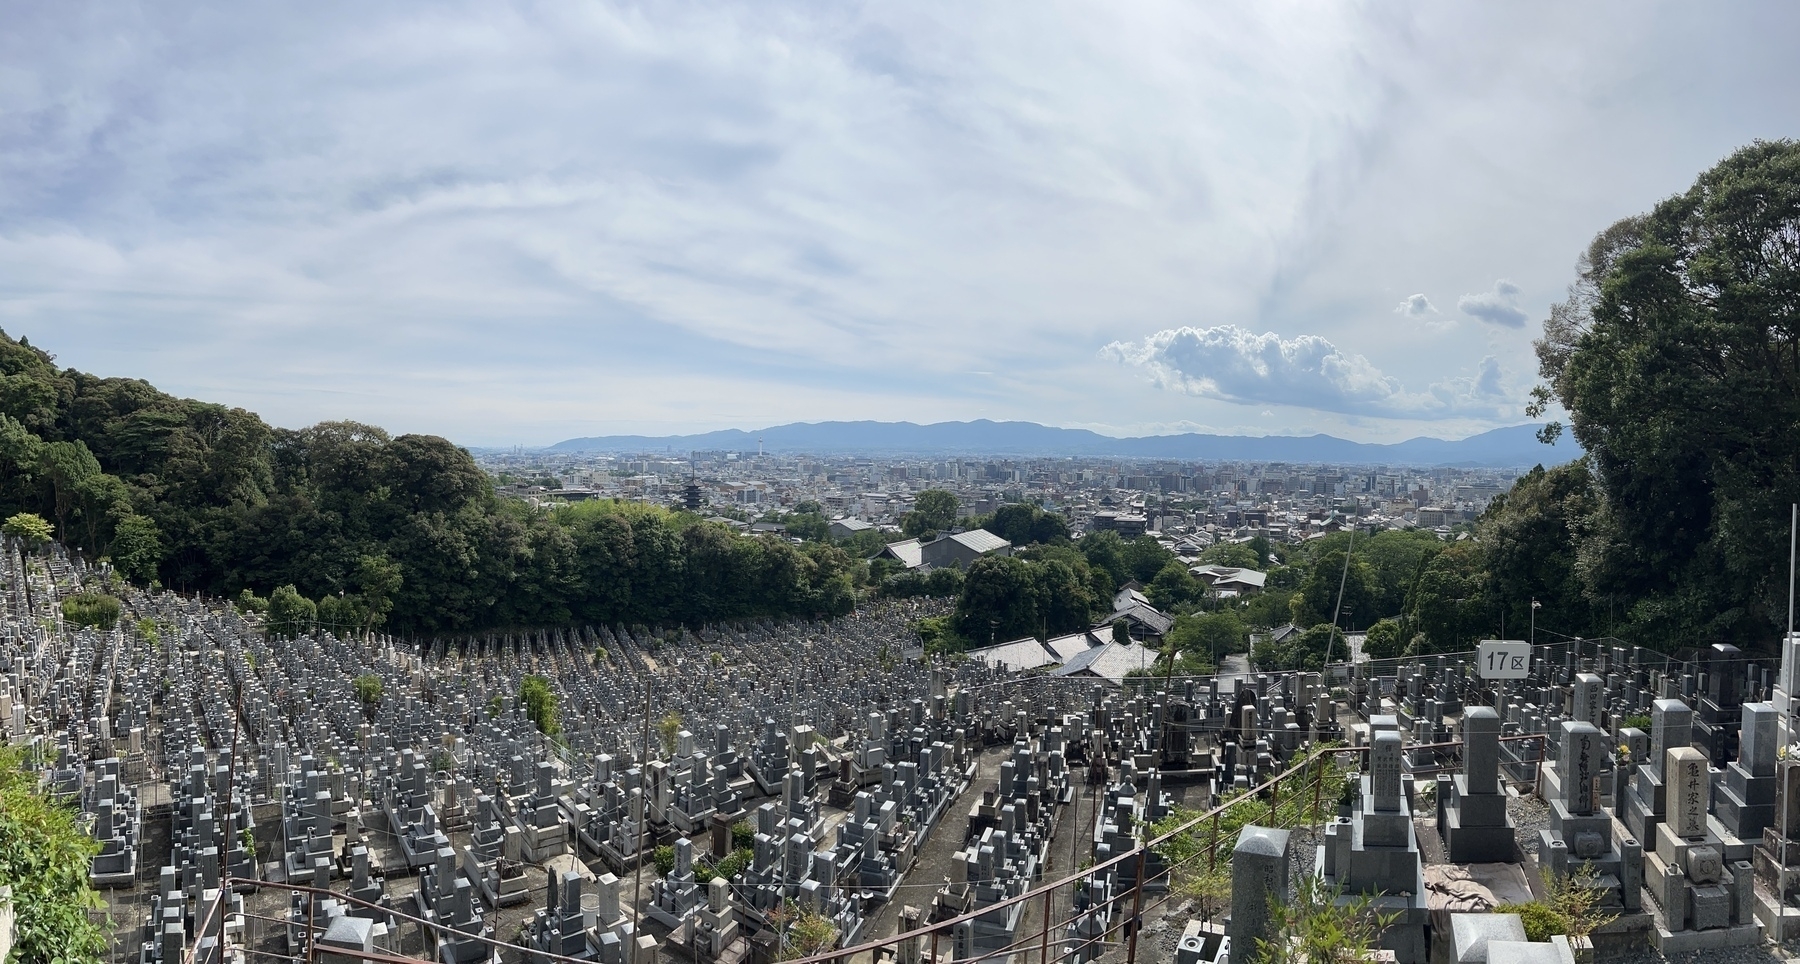 Panorama of Kyoto from Otani Sobyo. Manet grave stones in the foreground and city buildings in the back